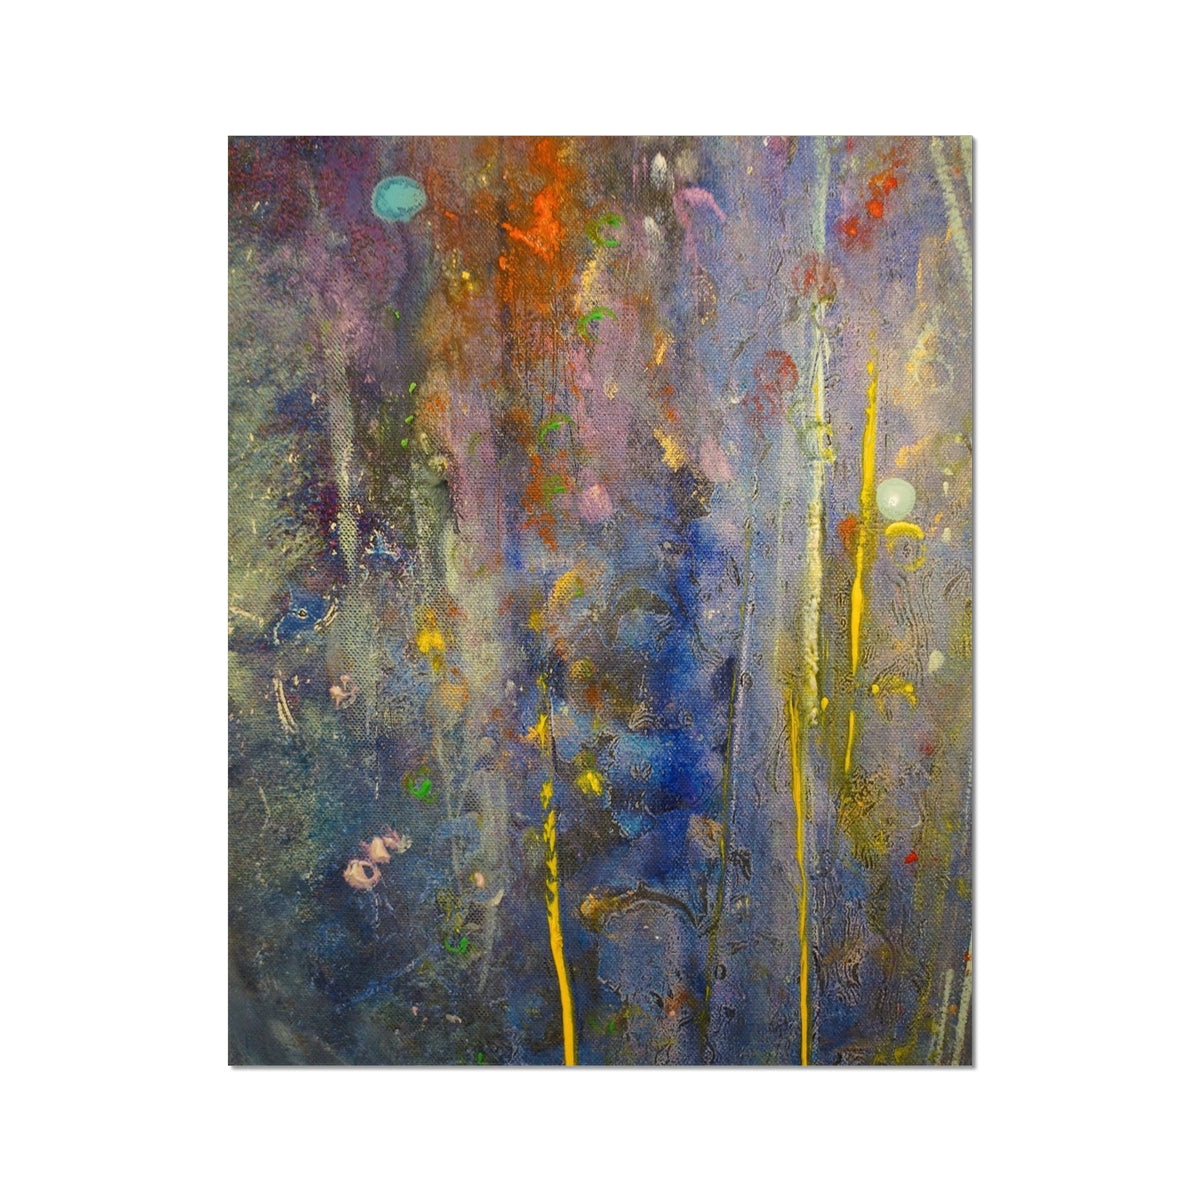 Cairngorms Waterfall Abstract Painting | Artist Proof Collector Prints From Scotland-Artist Proof Collector Prints-Abstract & Impressionistic Art Gallery-16"x20"-Paintings, Prints, Homeware, Art Gifts From Scotland By Scottish Artist Kevin Hunter